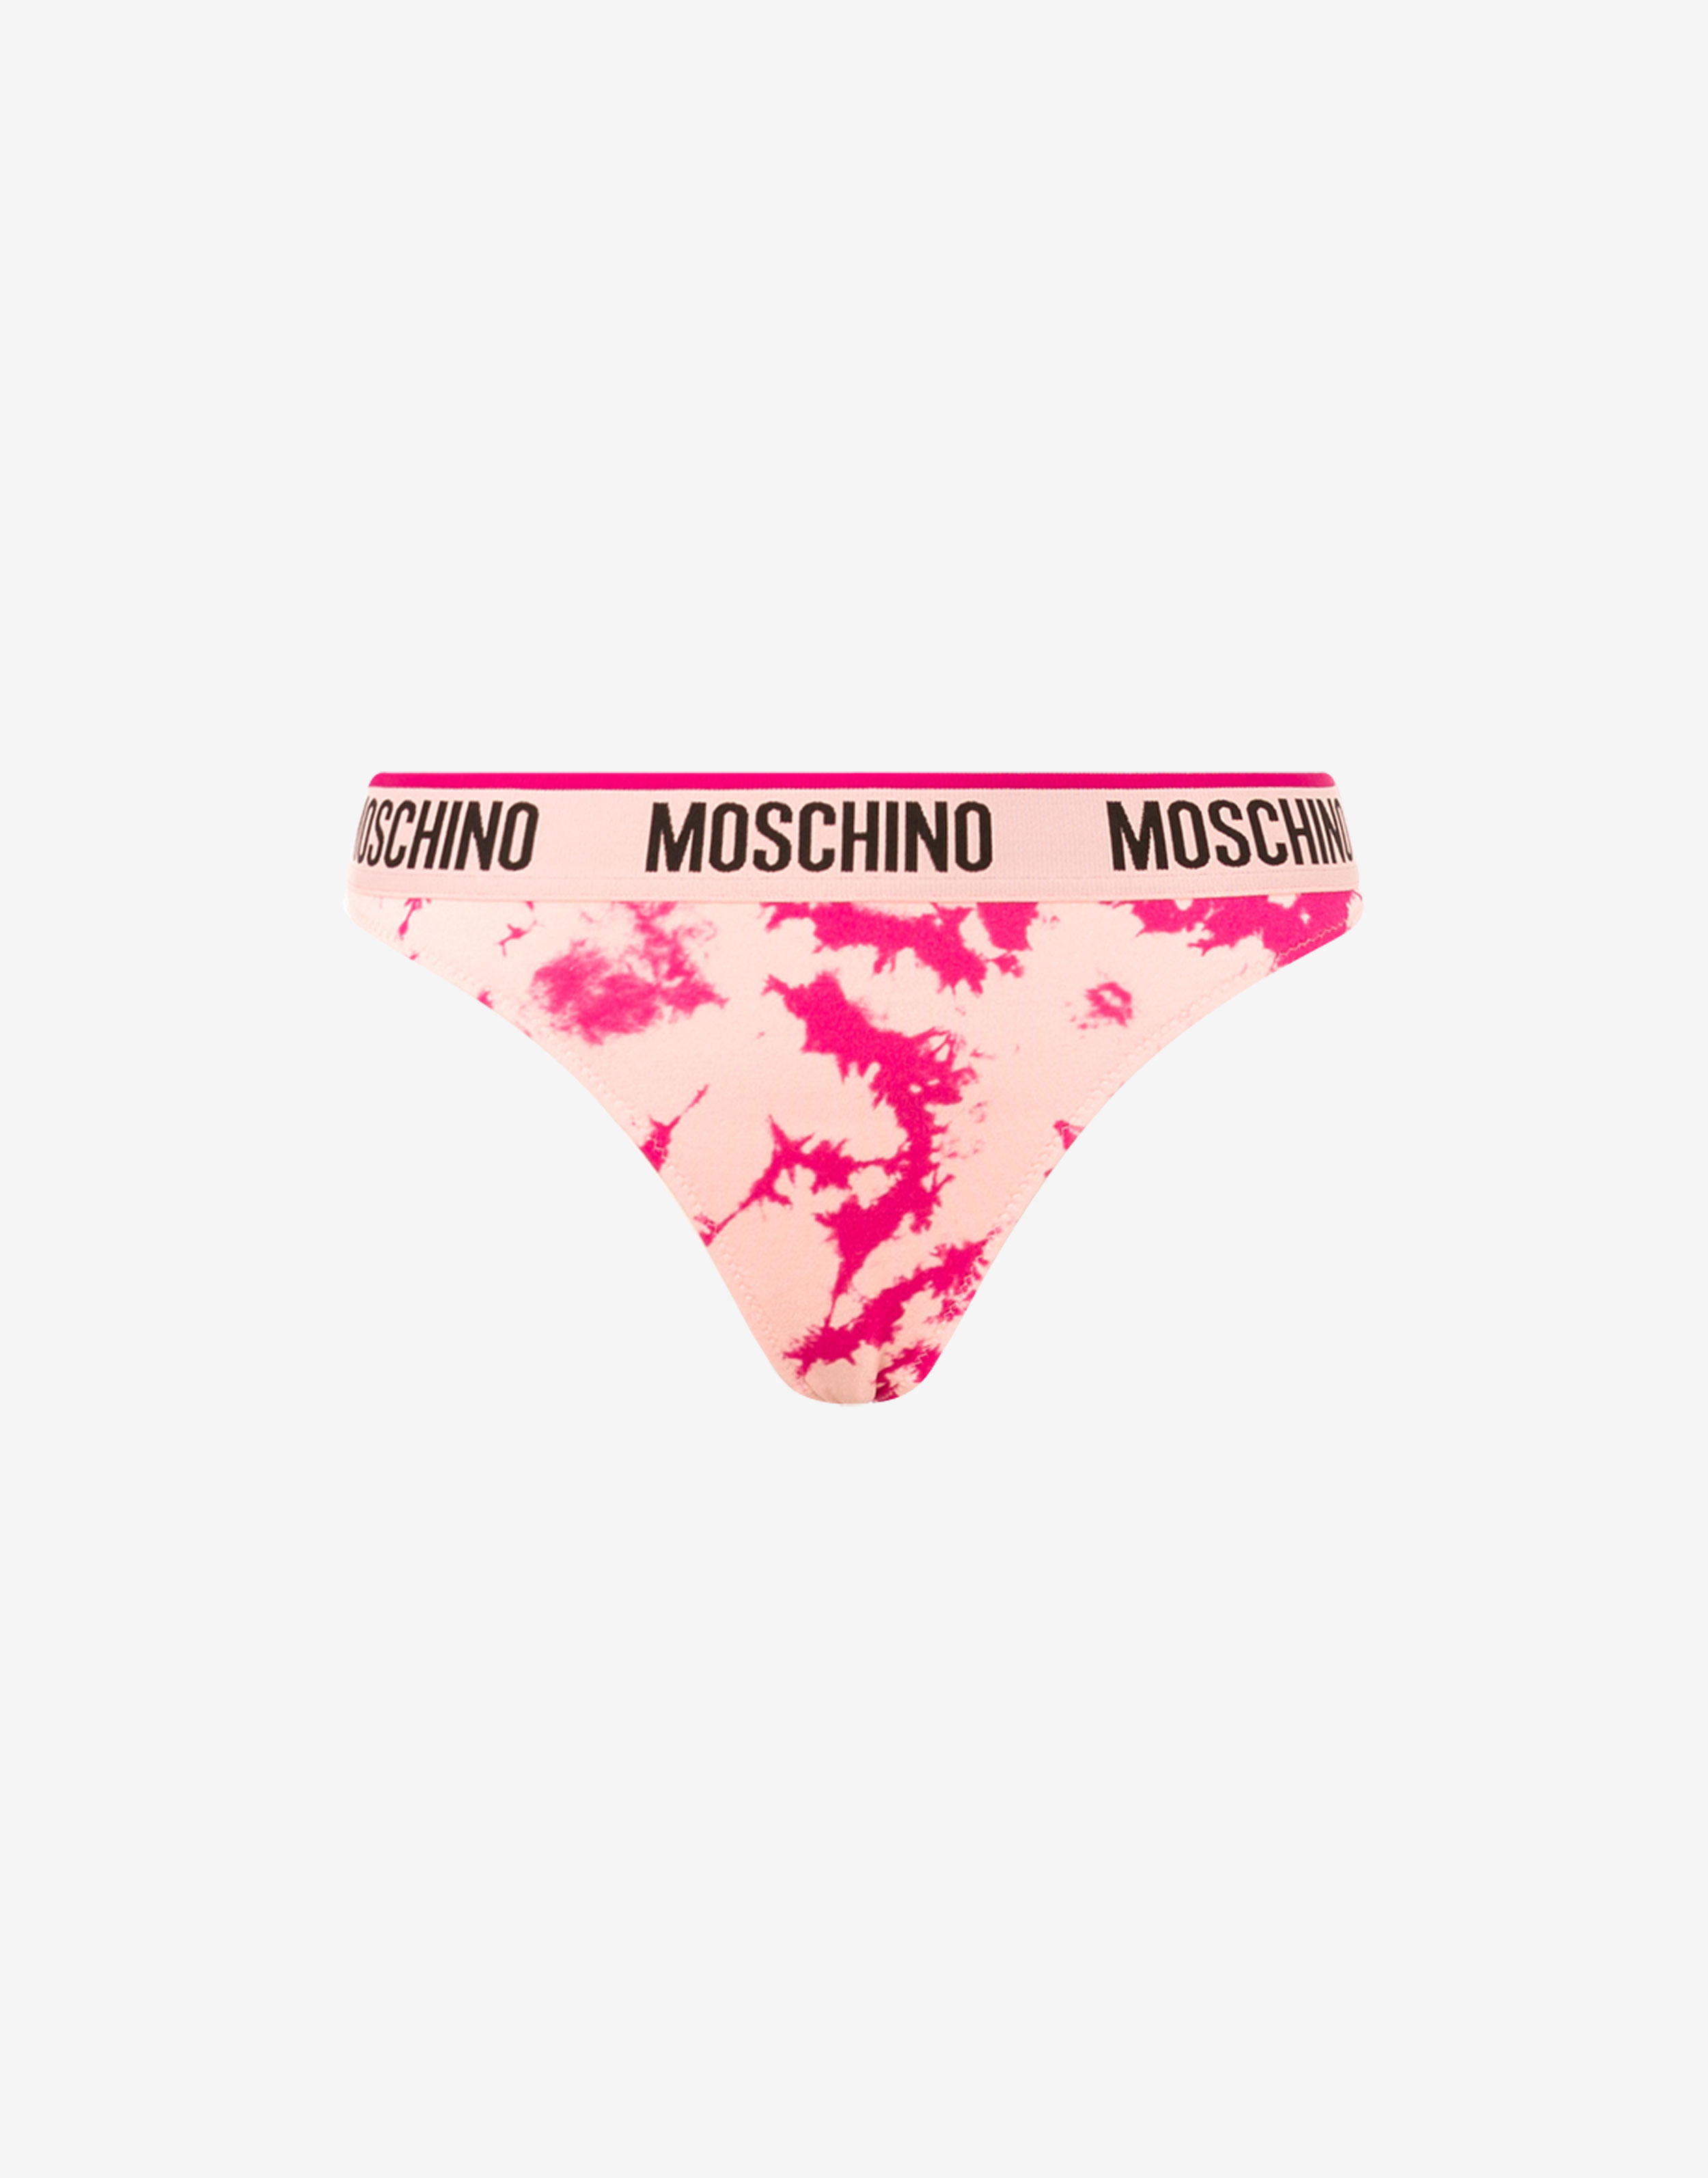 Moschino Underwear for Sale - Official Store